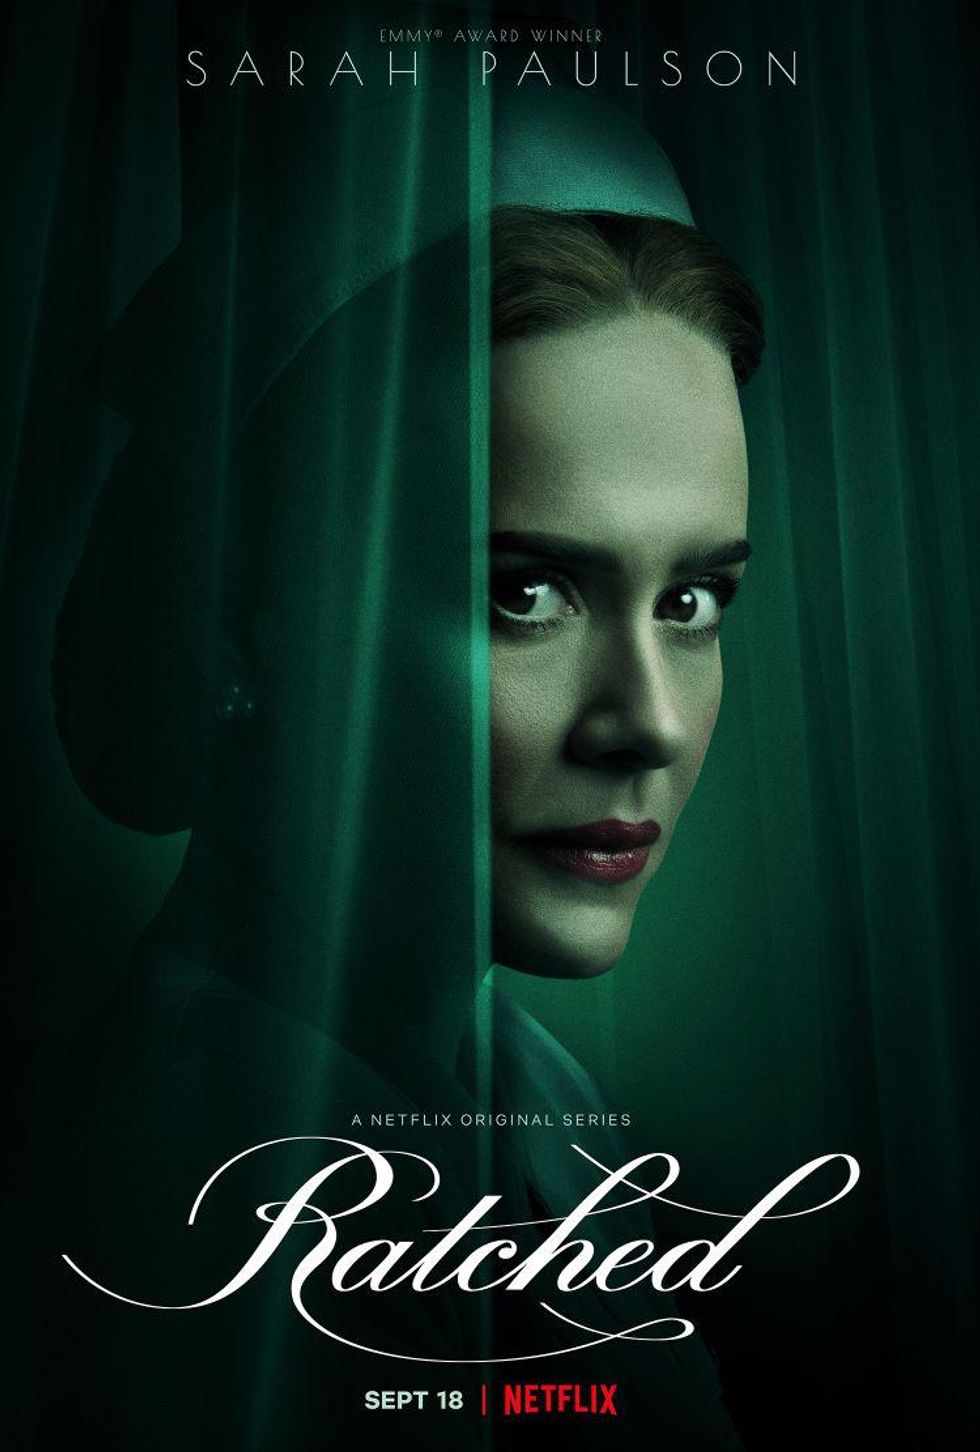 Sarah Paulson Gets Murderous in Netflix's First 'Ratched' Trailer